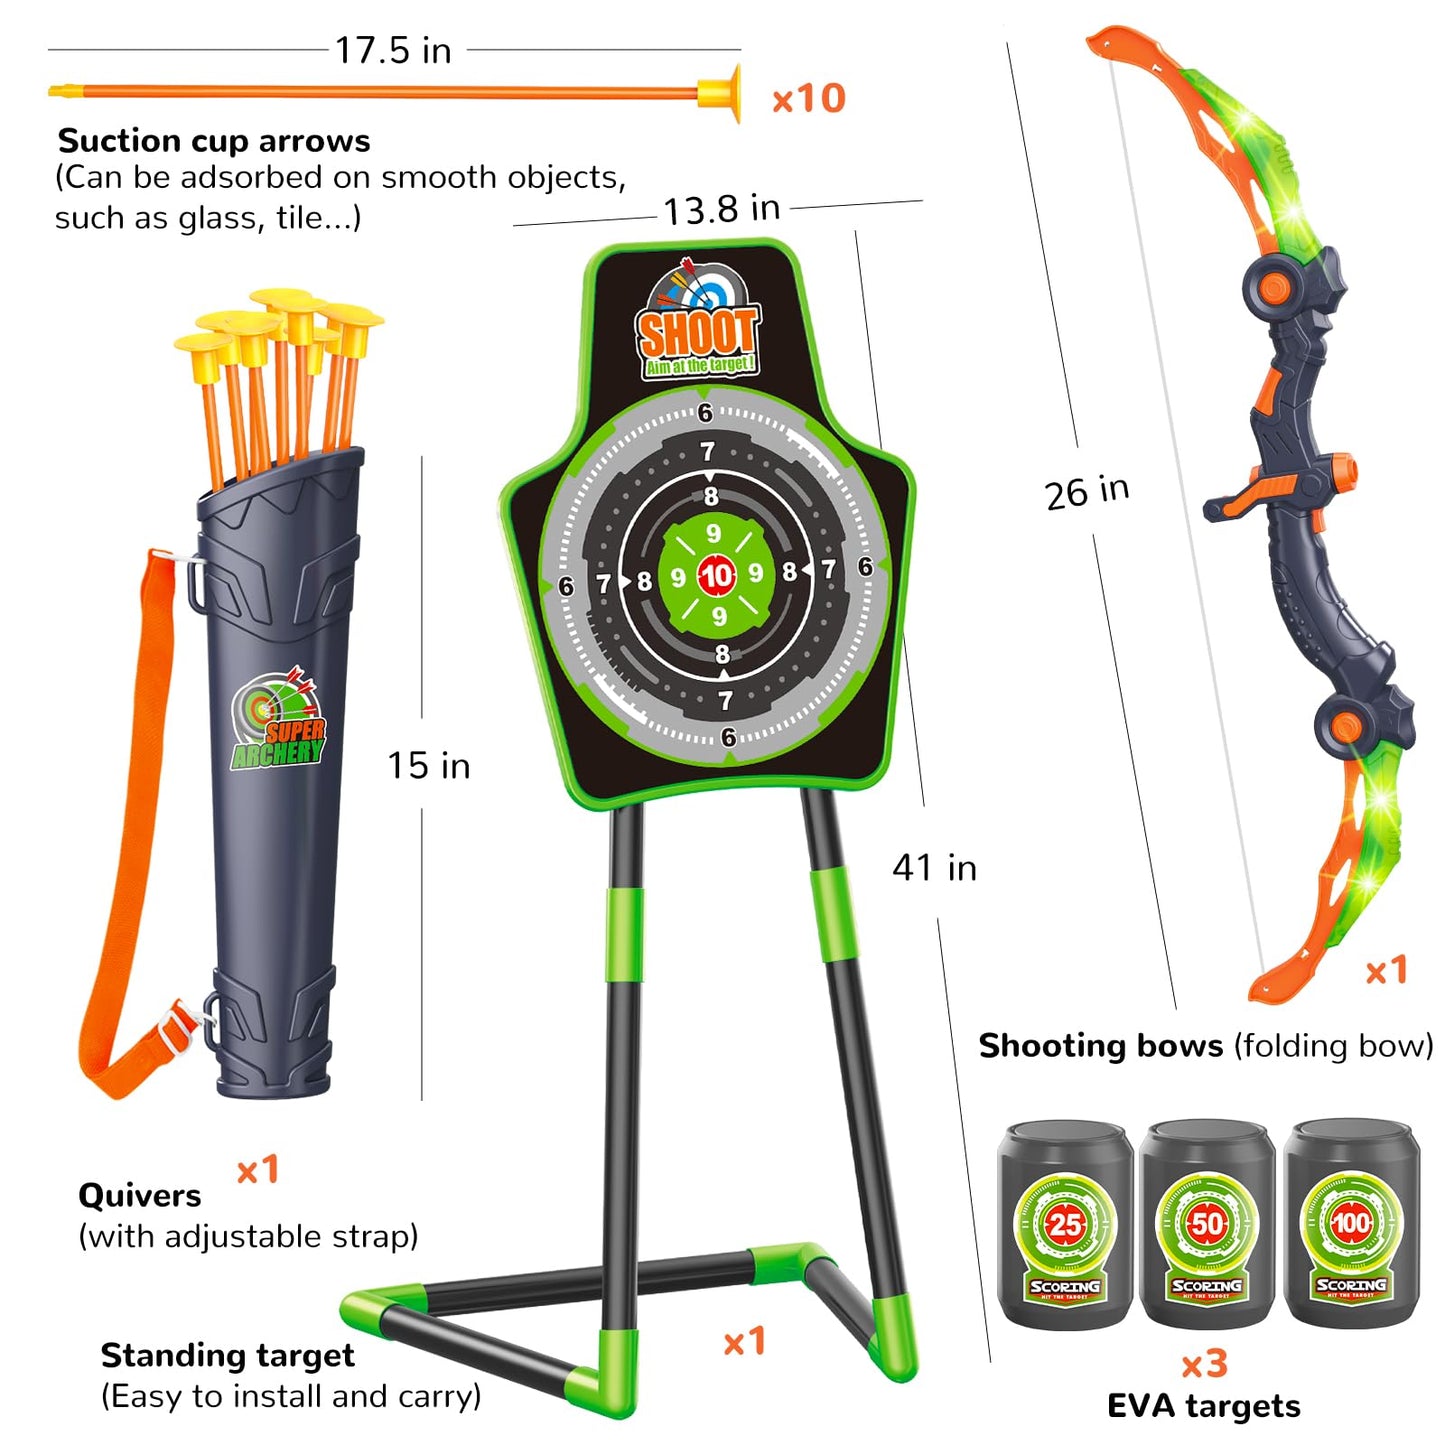 Bow and Arrow Toys for Kids, Archery Set Includes Super Bow with LED Lights, 10 Suction Cups Arrows,Archery Set with Standing Target and 3 Target Cans for Boys Girls